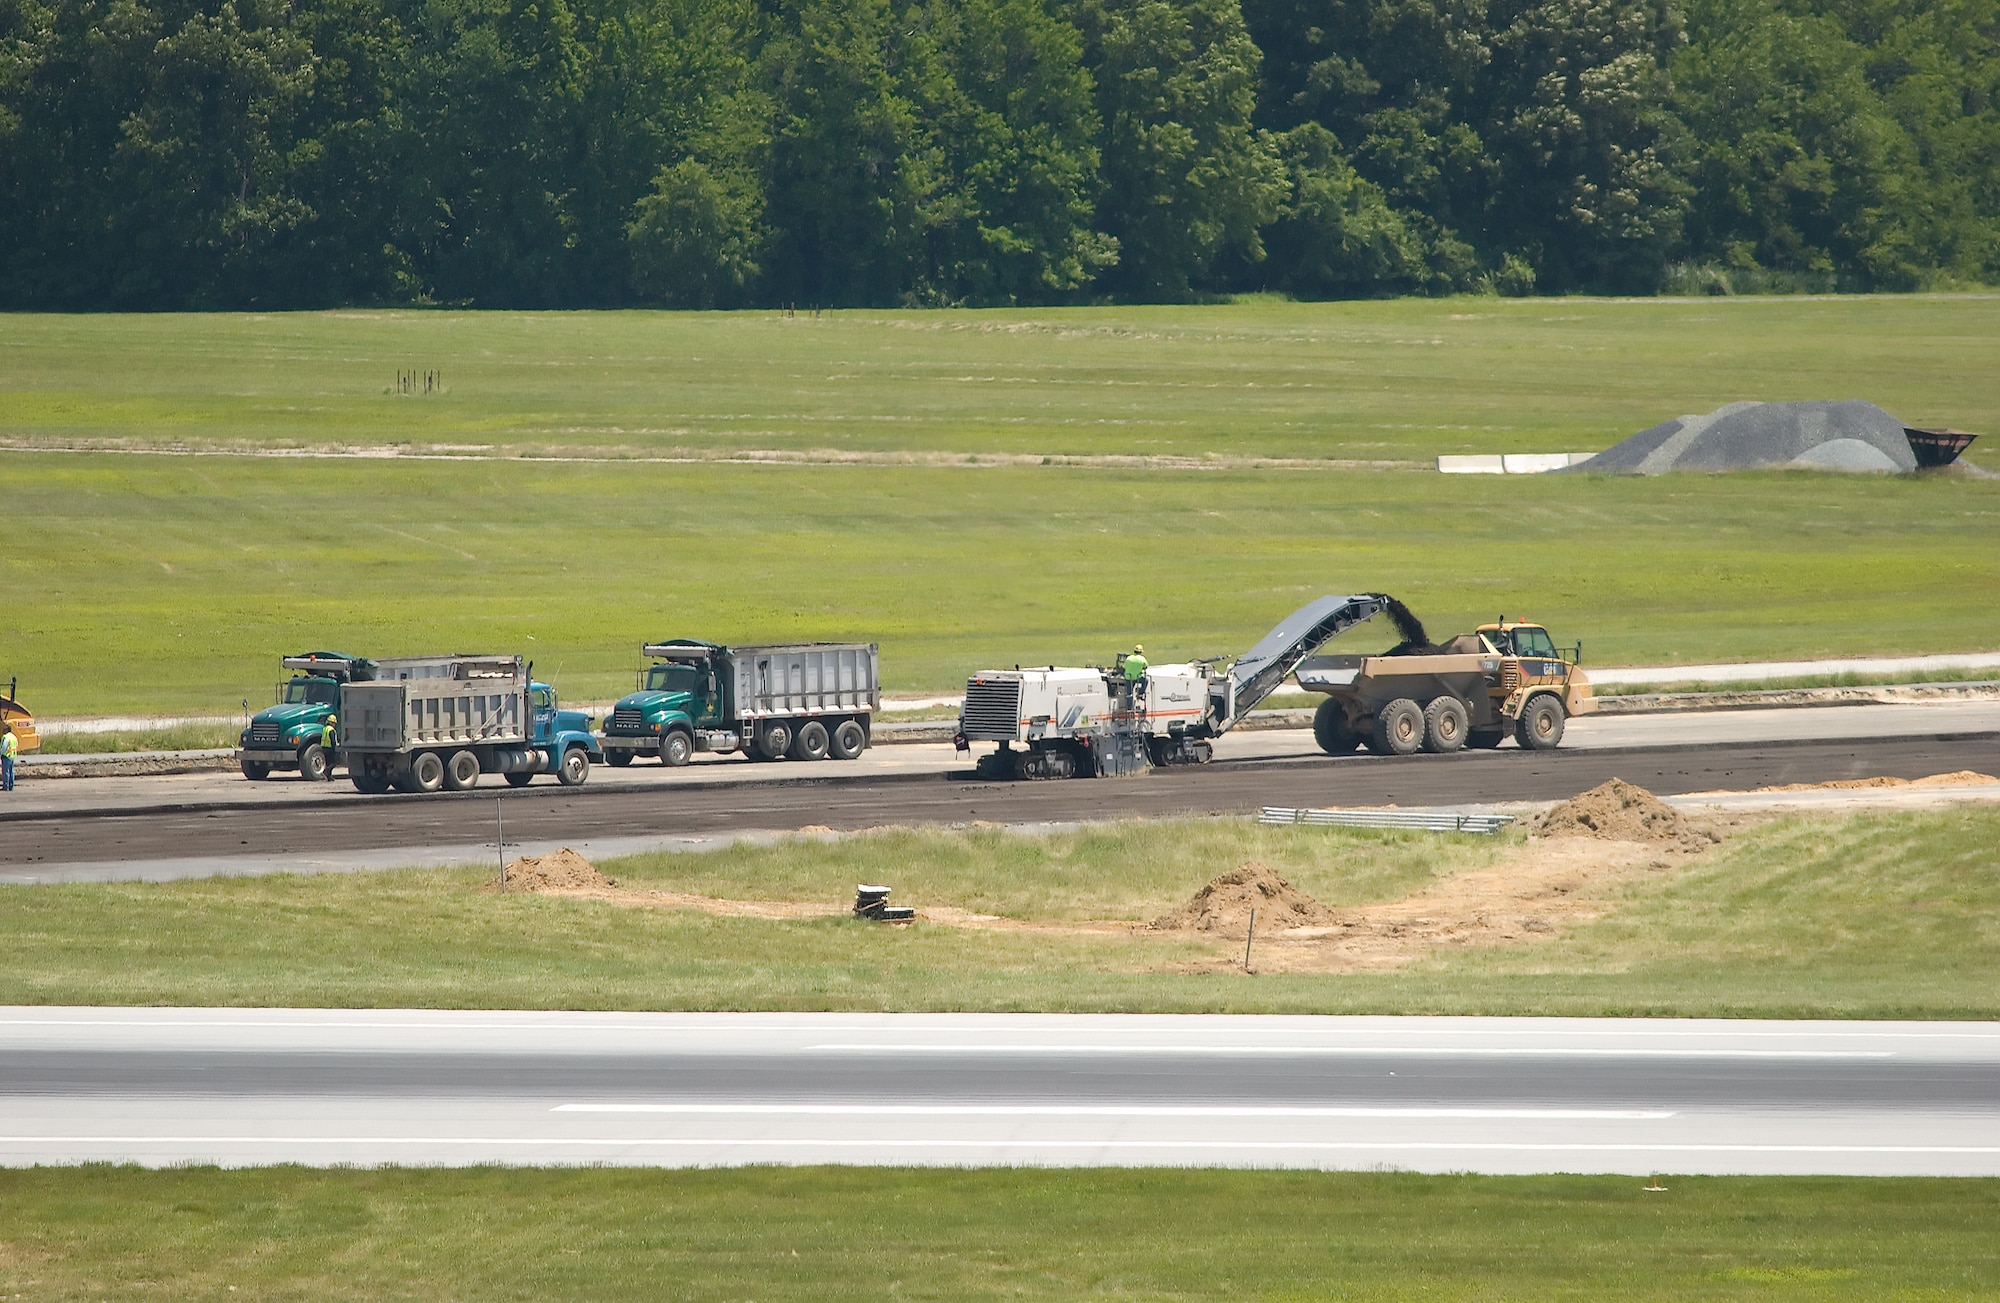 Contractors work on runway 14/32 at Dover Air Force Base. The project involved the demolition of the existing runway and repaving a total distance of 13,800 ft. (U.S. Air Force photo/Jason Minto)